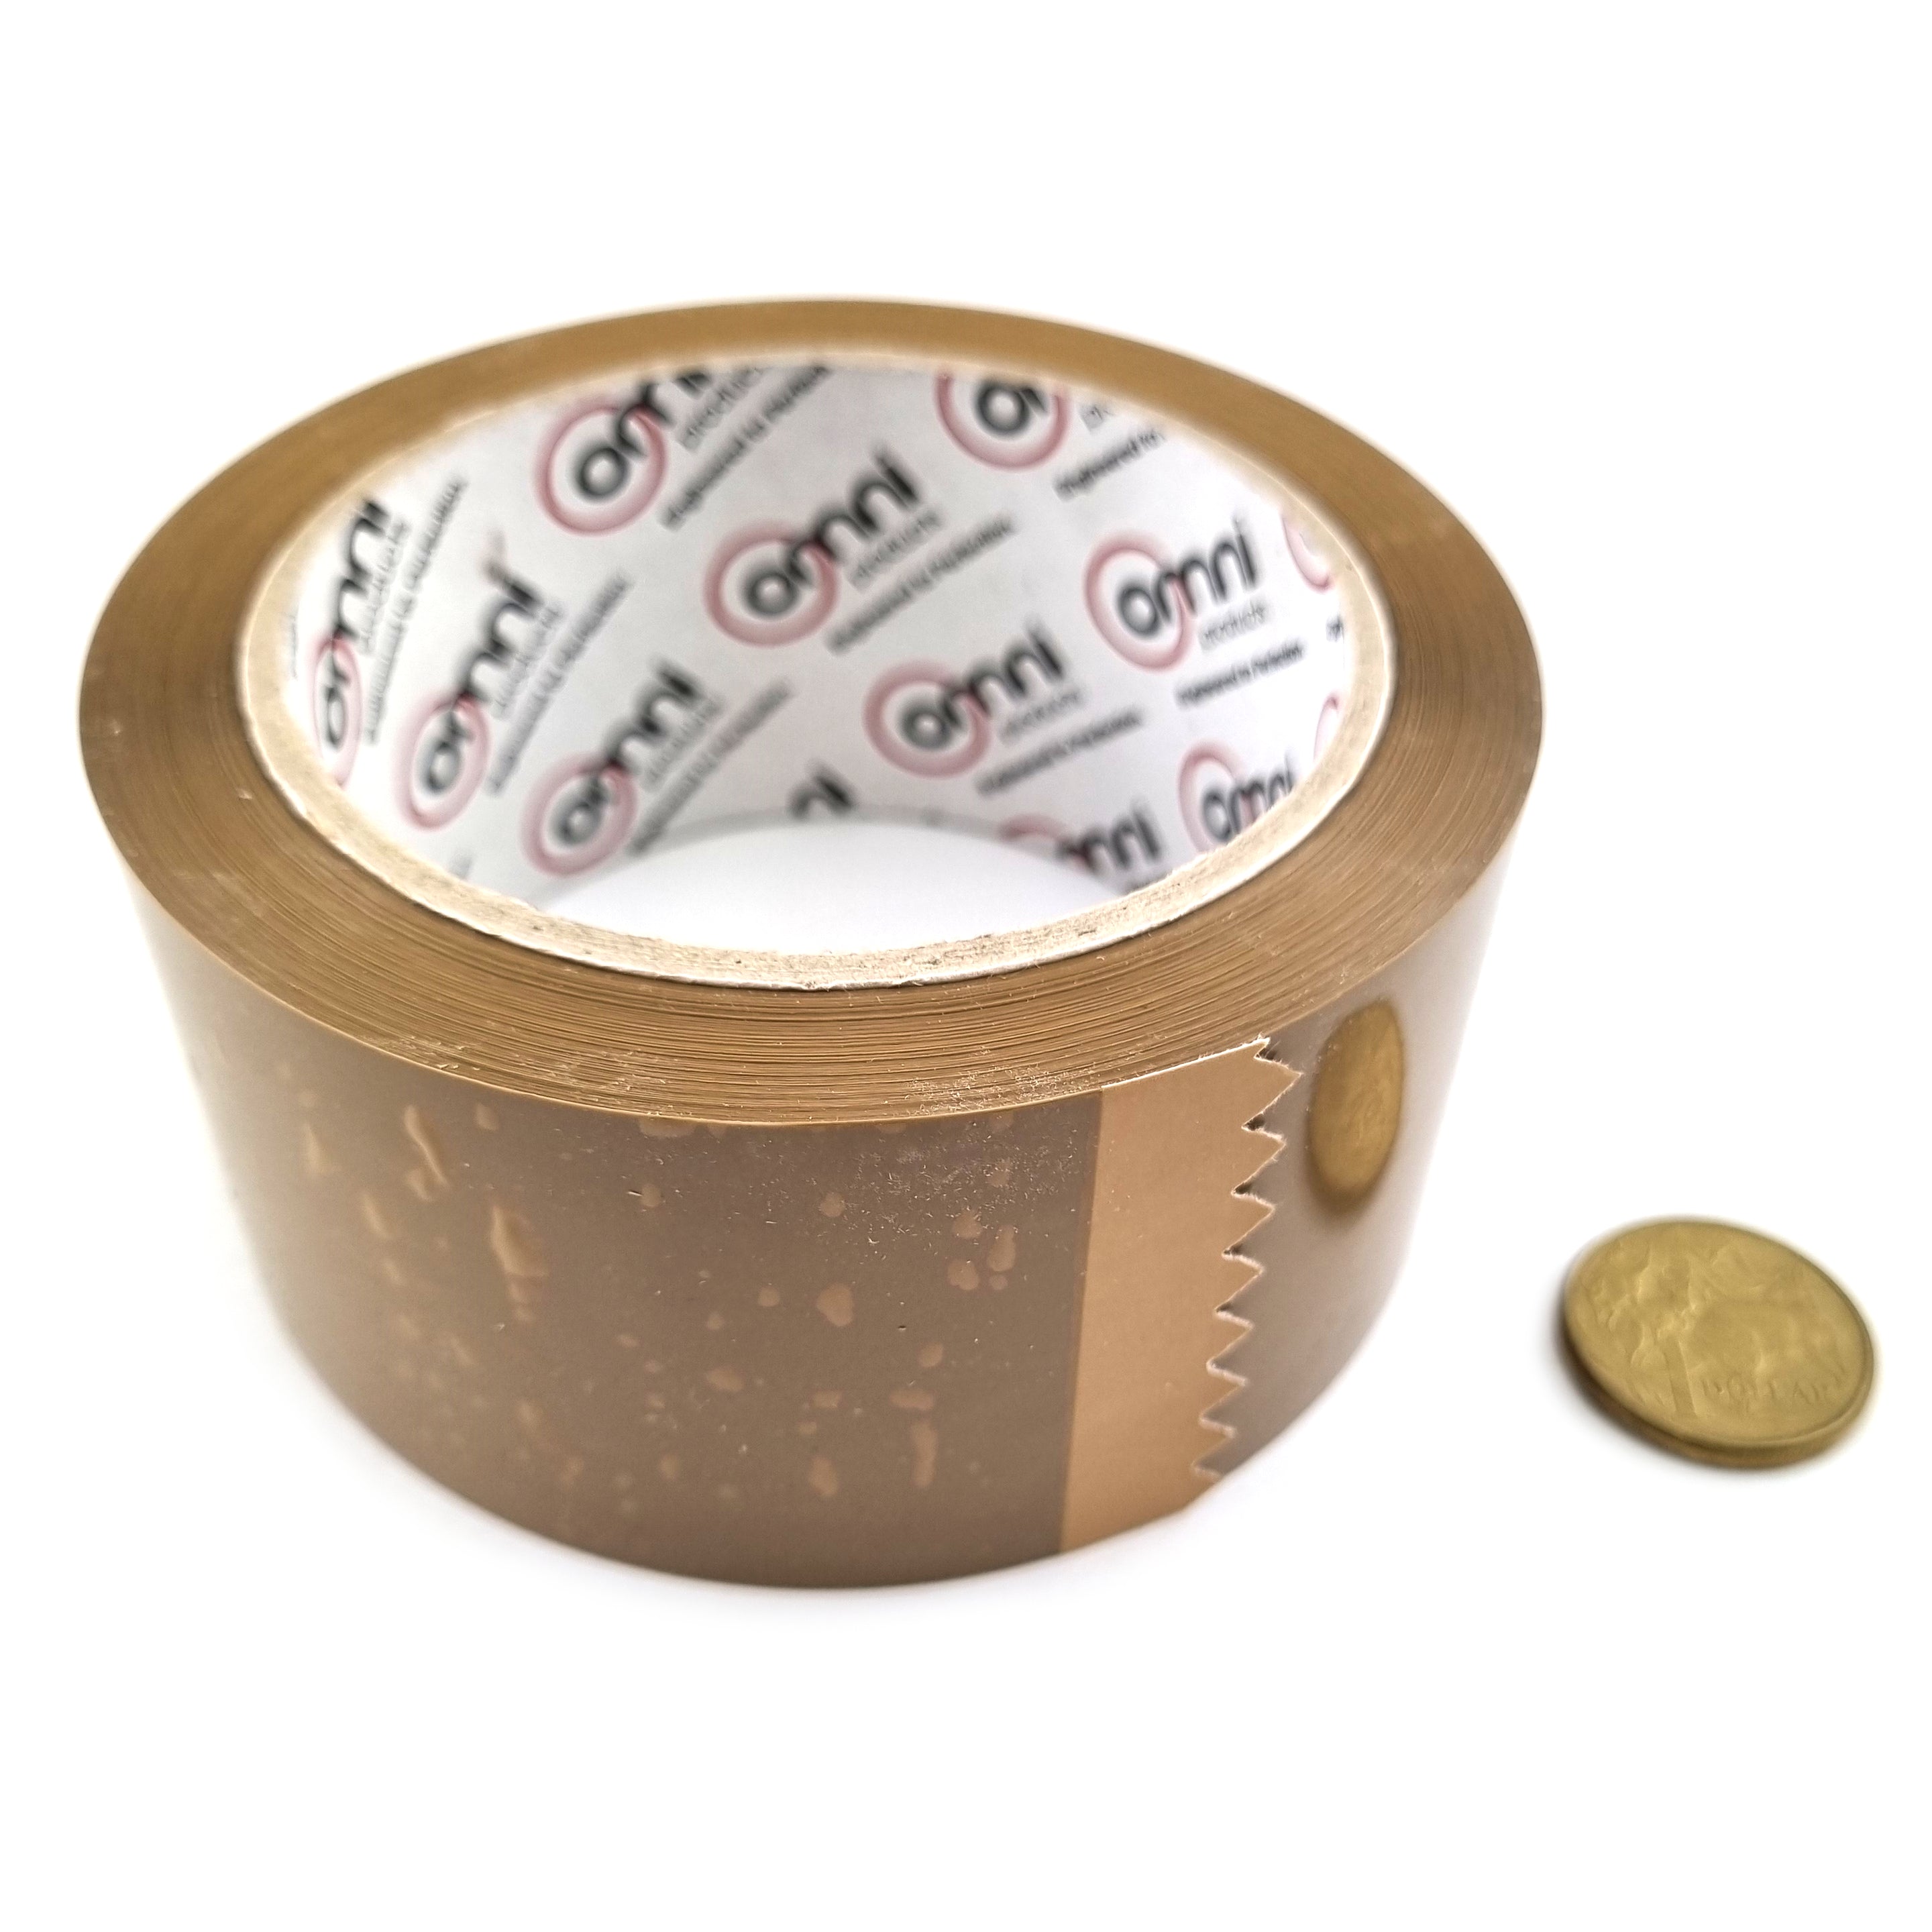 Bulk buy general sticky tape in a box of 12, roll size: 50mm wide x 75m roll.